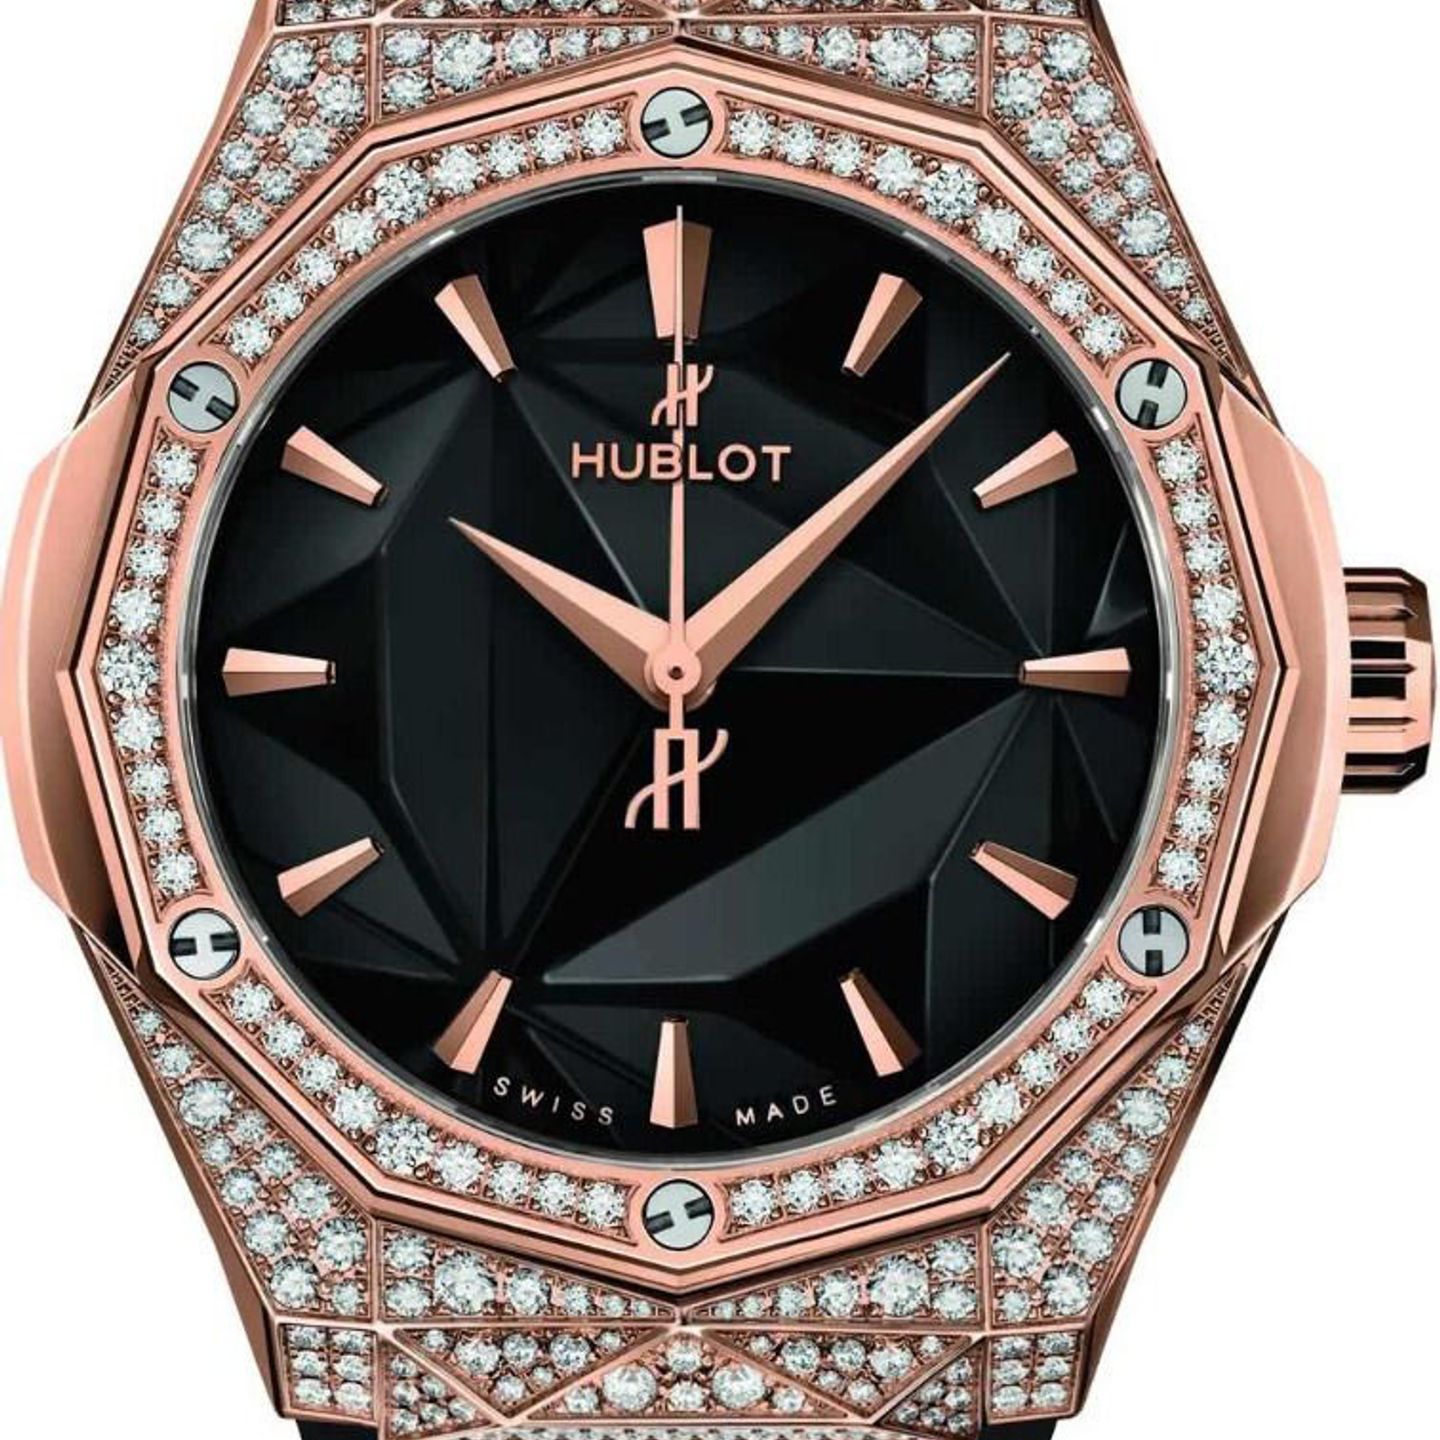 Hublot Classic Fusion 45, 42, 38, 33 mm 550.OS.1800.RX.1604.ORL19 (2022) - Black dial 40 mm Rose Gold case (1/1)